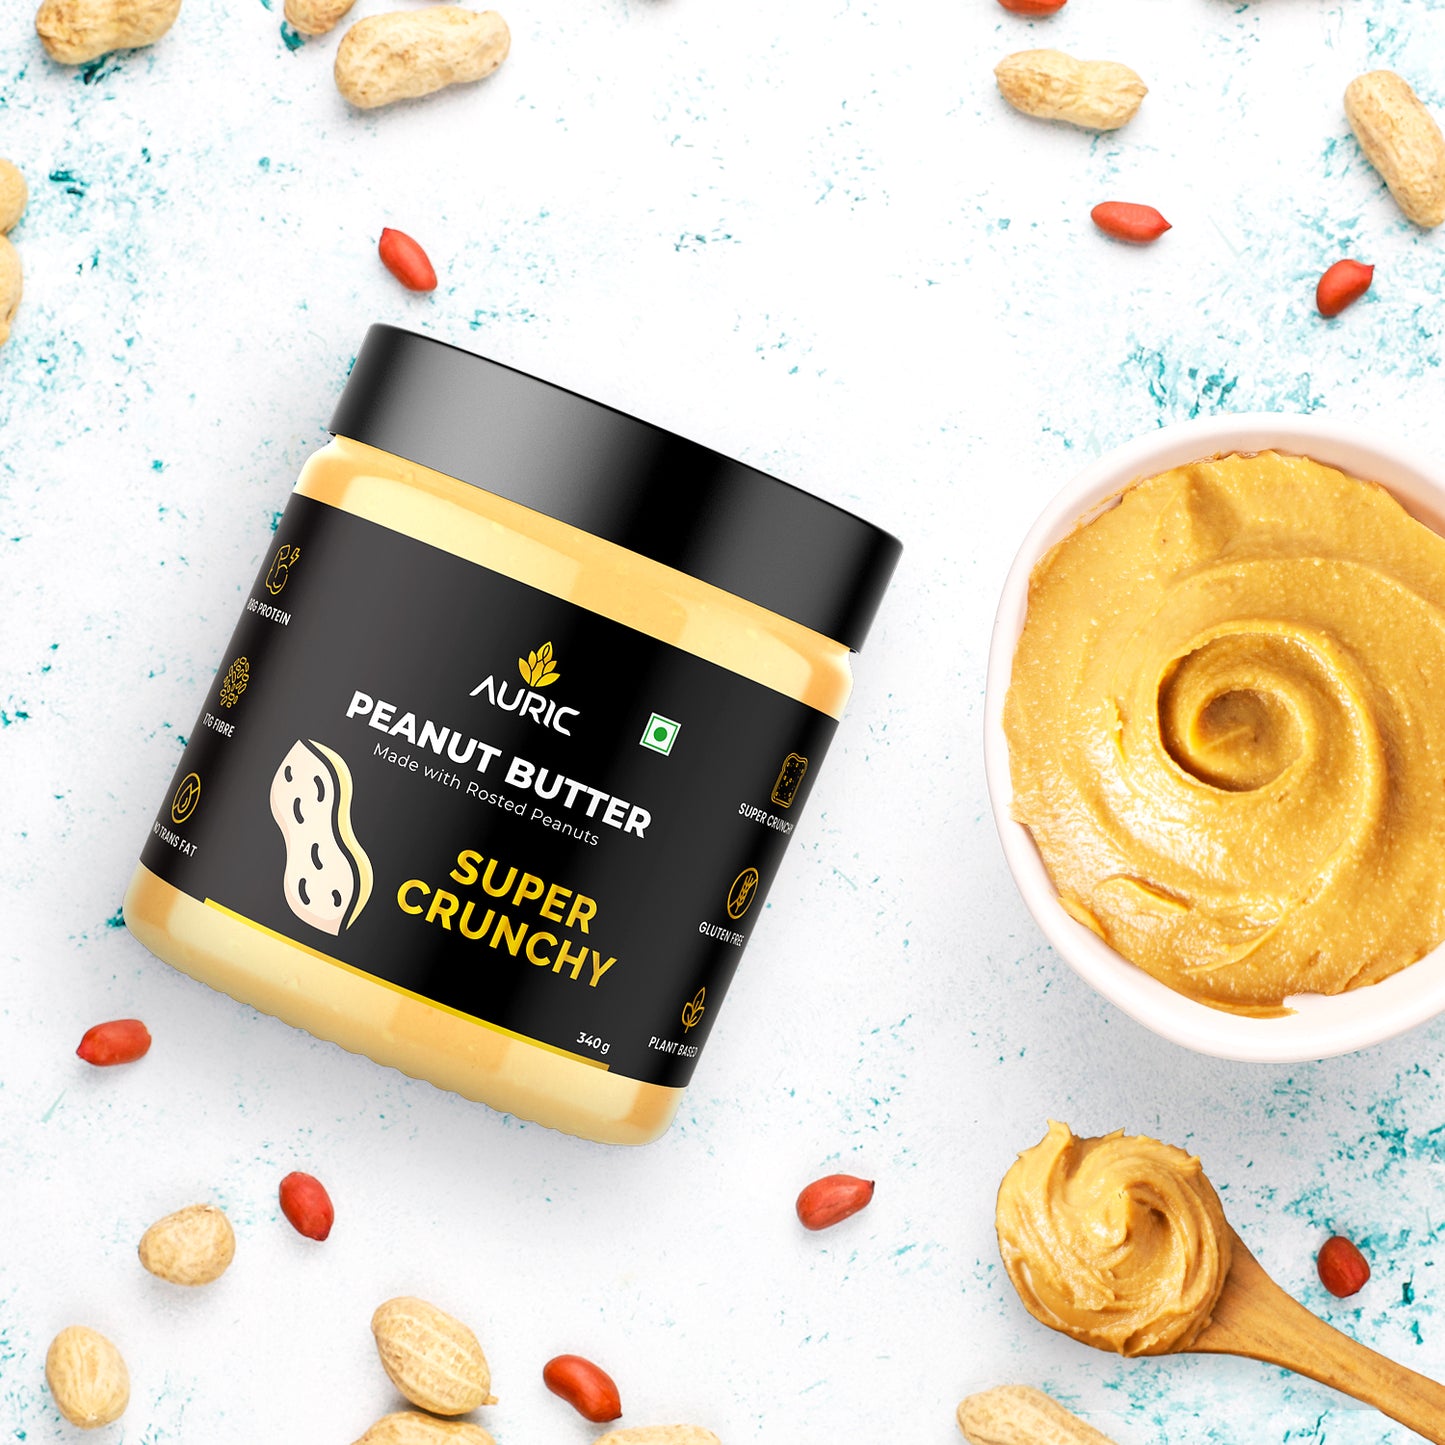 Peanut Butter Crunchy | High Protein Plant Based Peanut Butter | Roasted Peanuts | Gluten and Lactose-free | 340 g